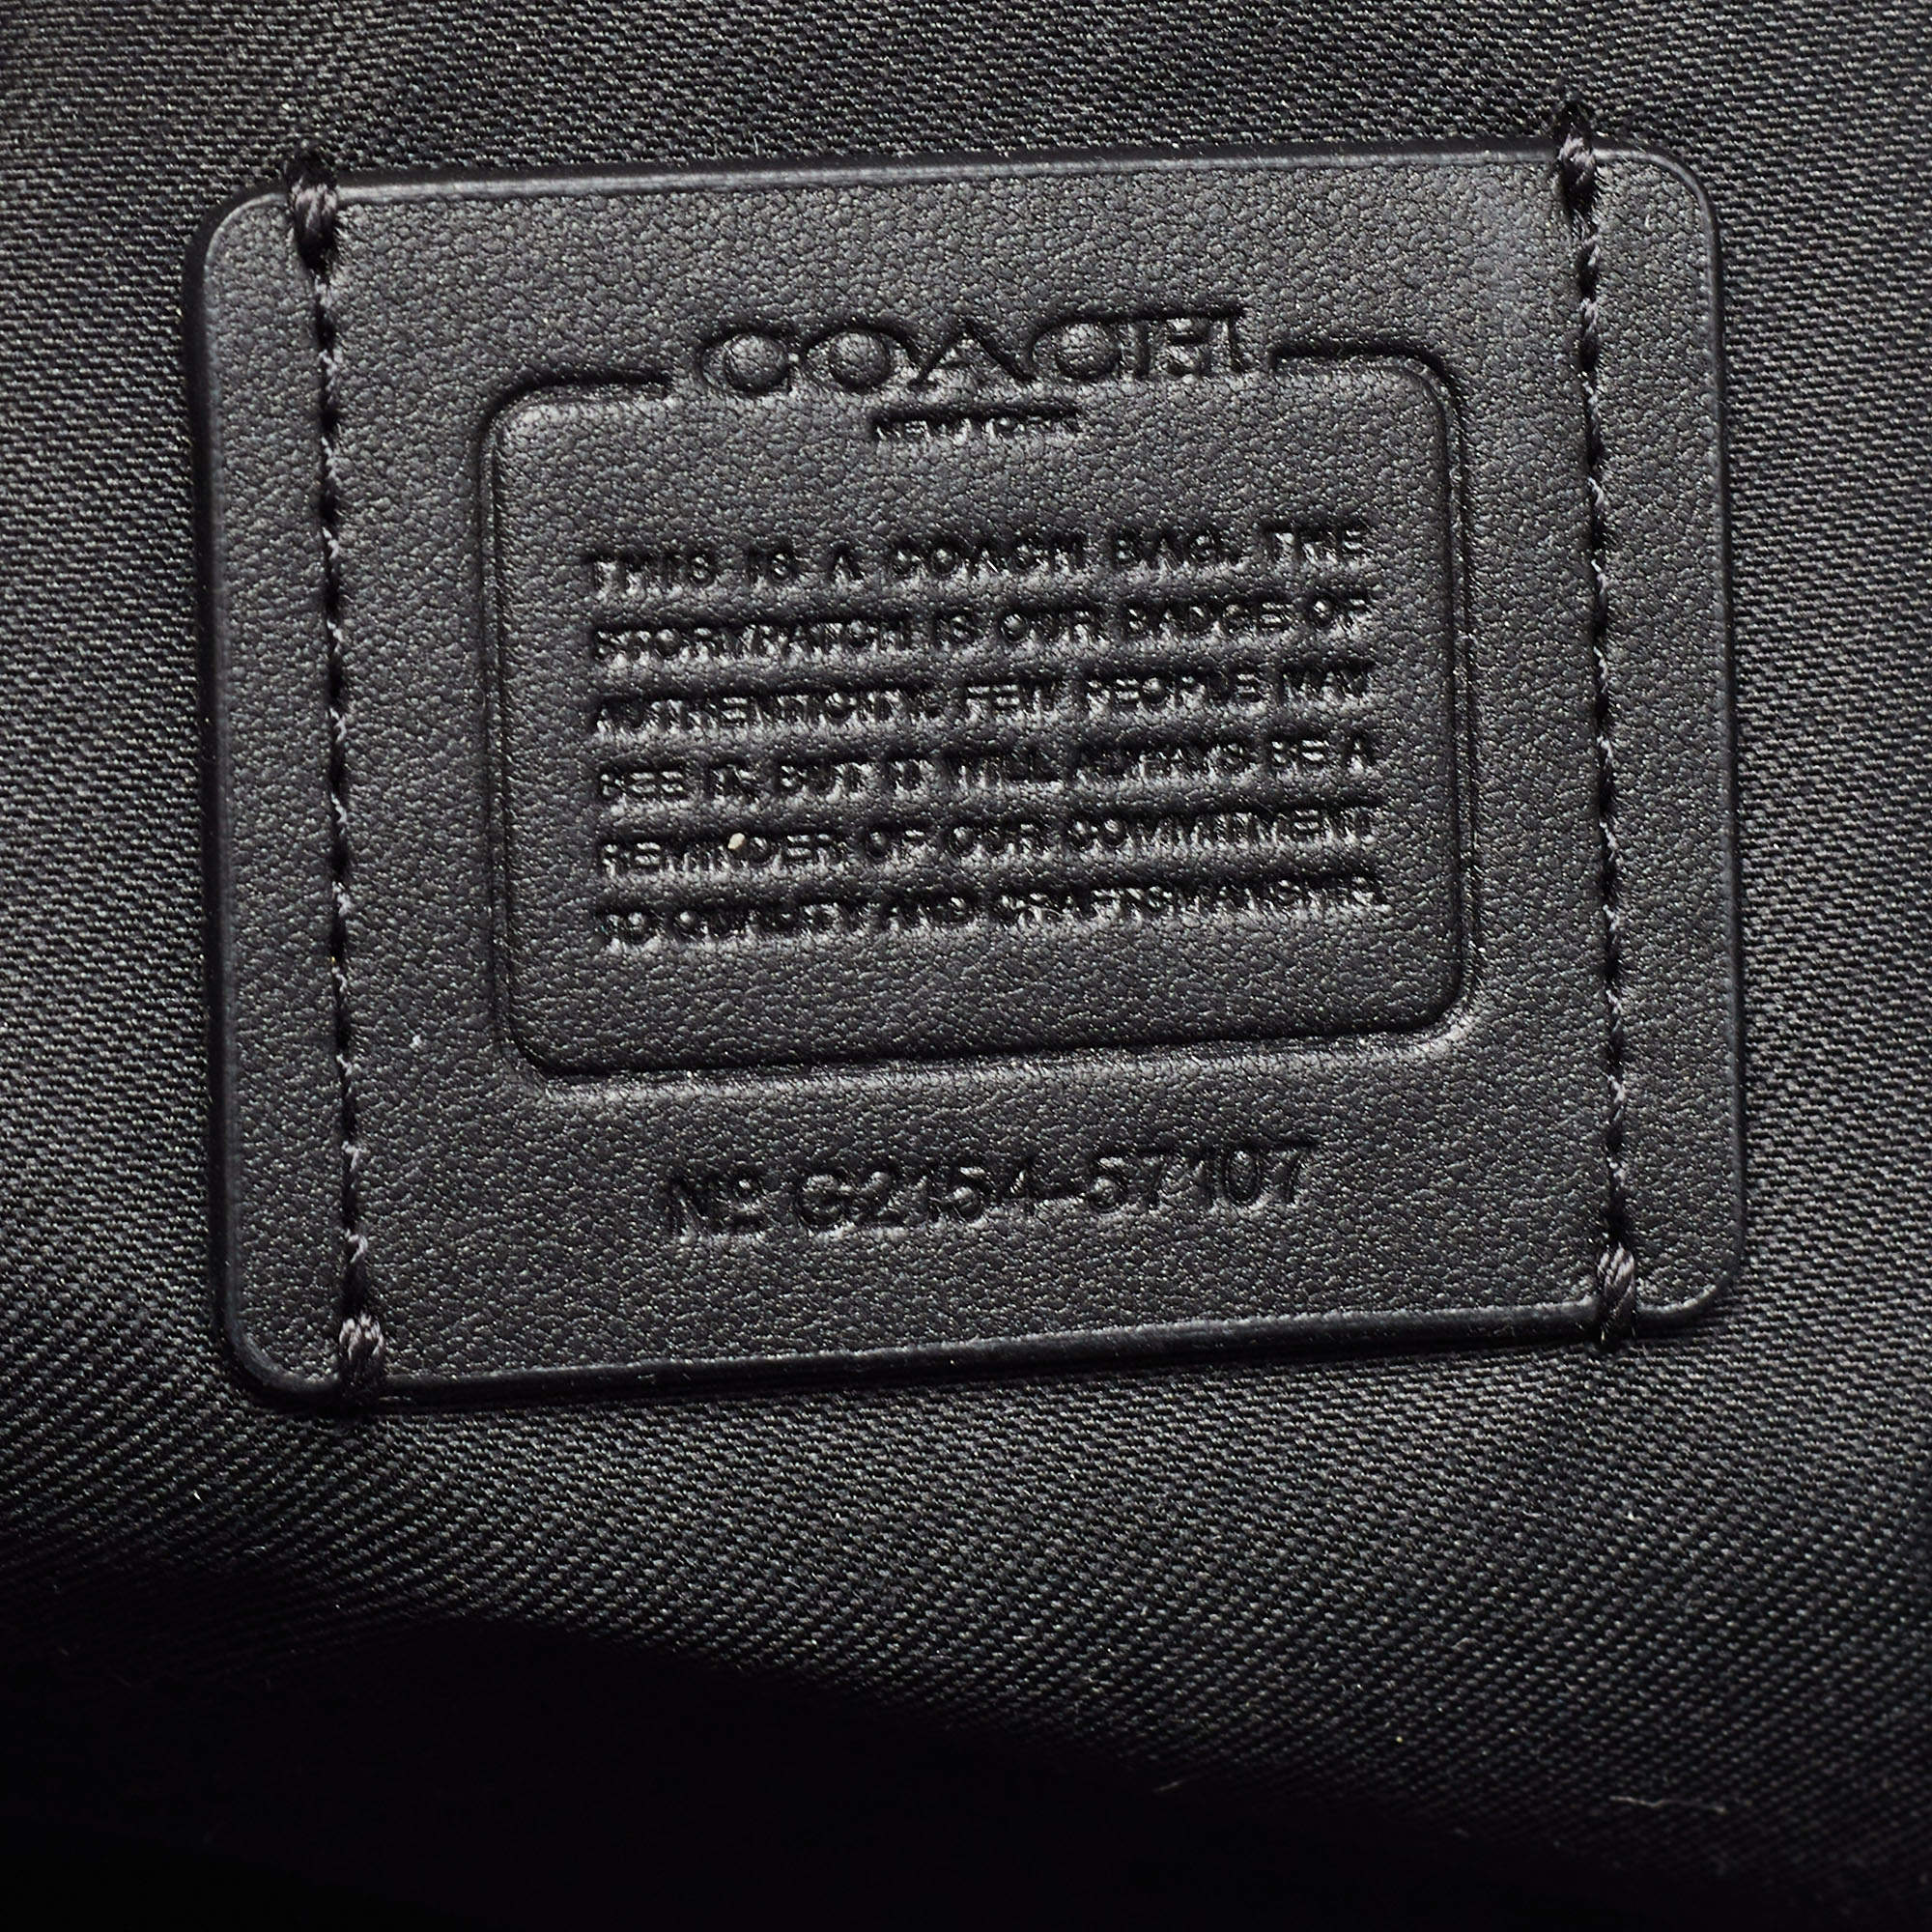 Coach+Pebbled+Turnlock+Chain+56830+Black+Leather+Tote+04018743 for